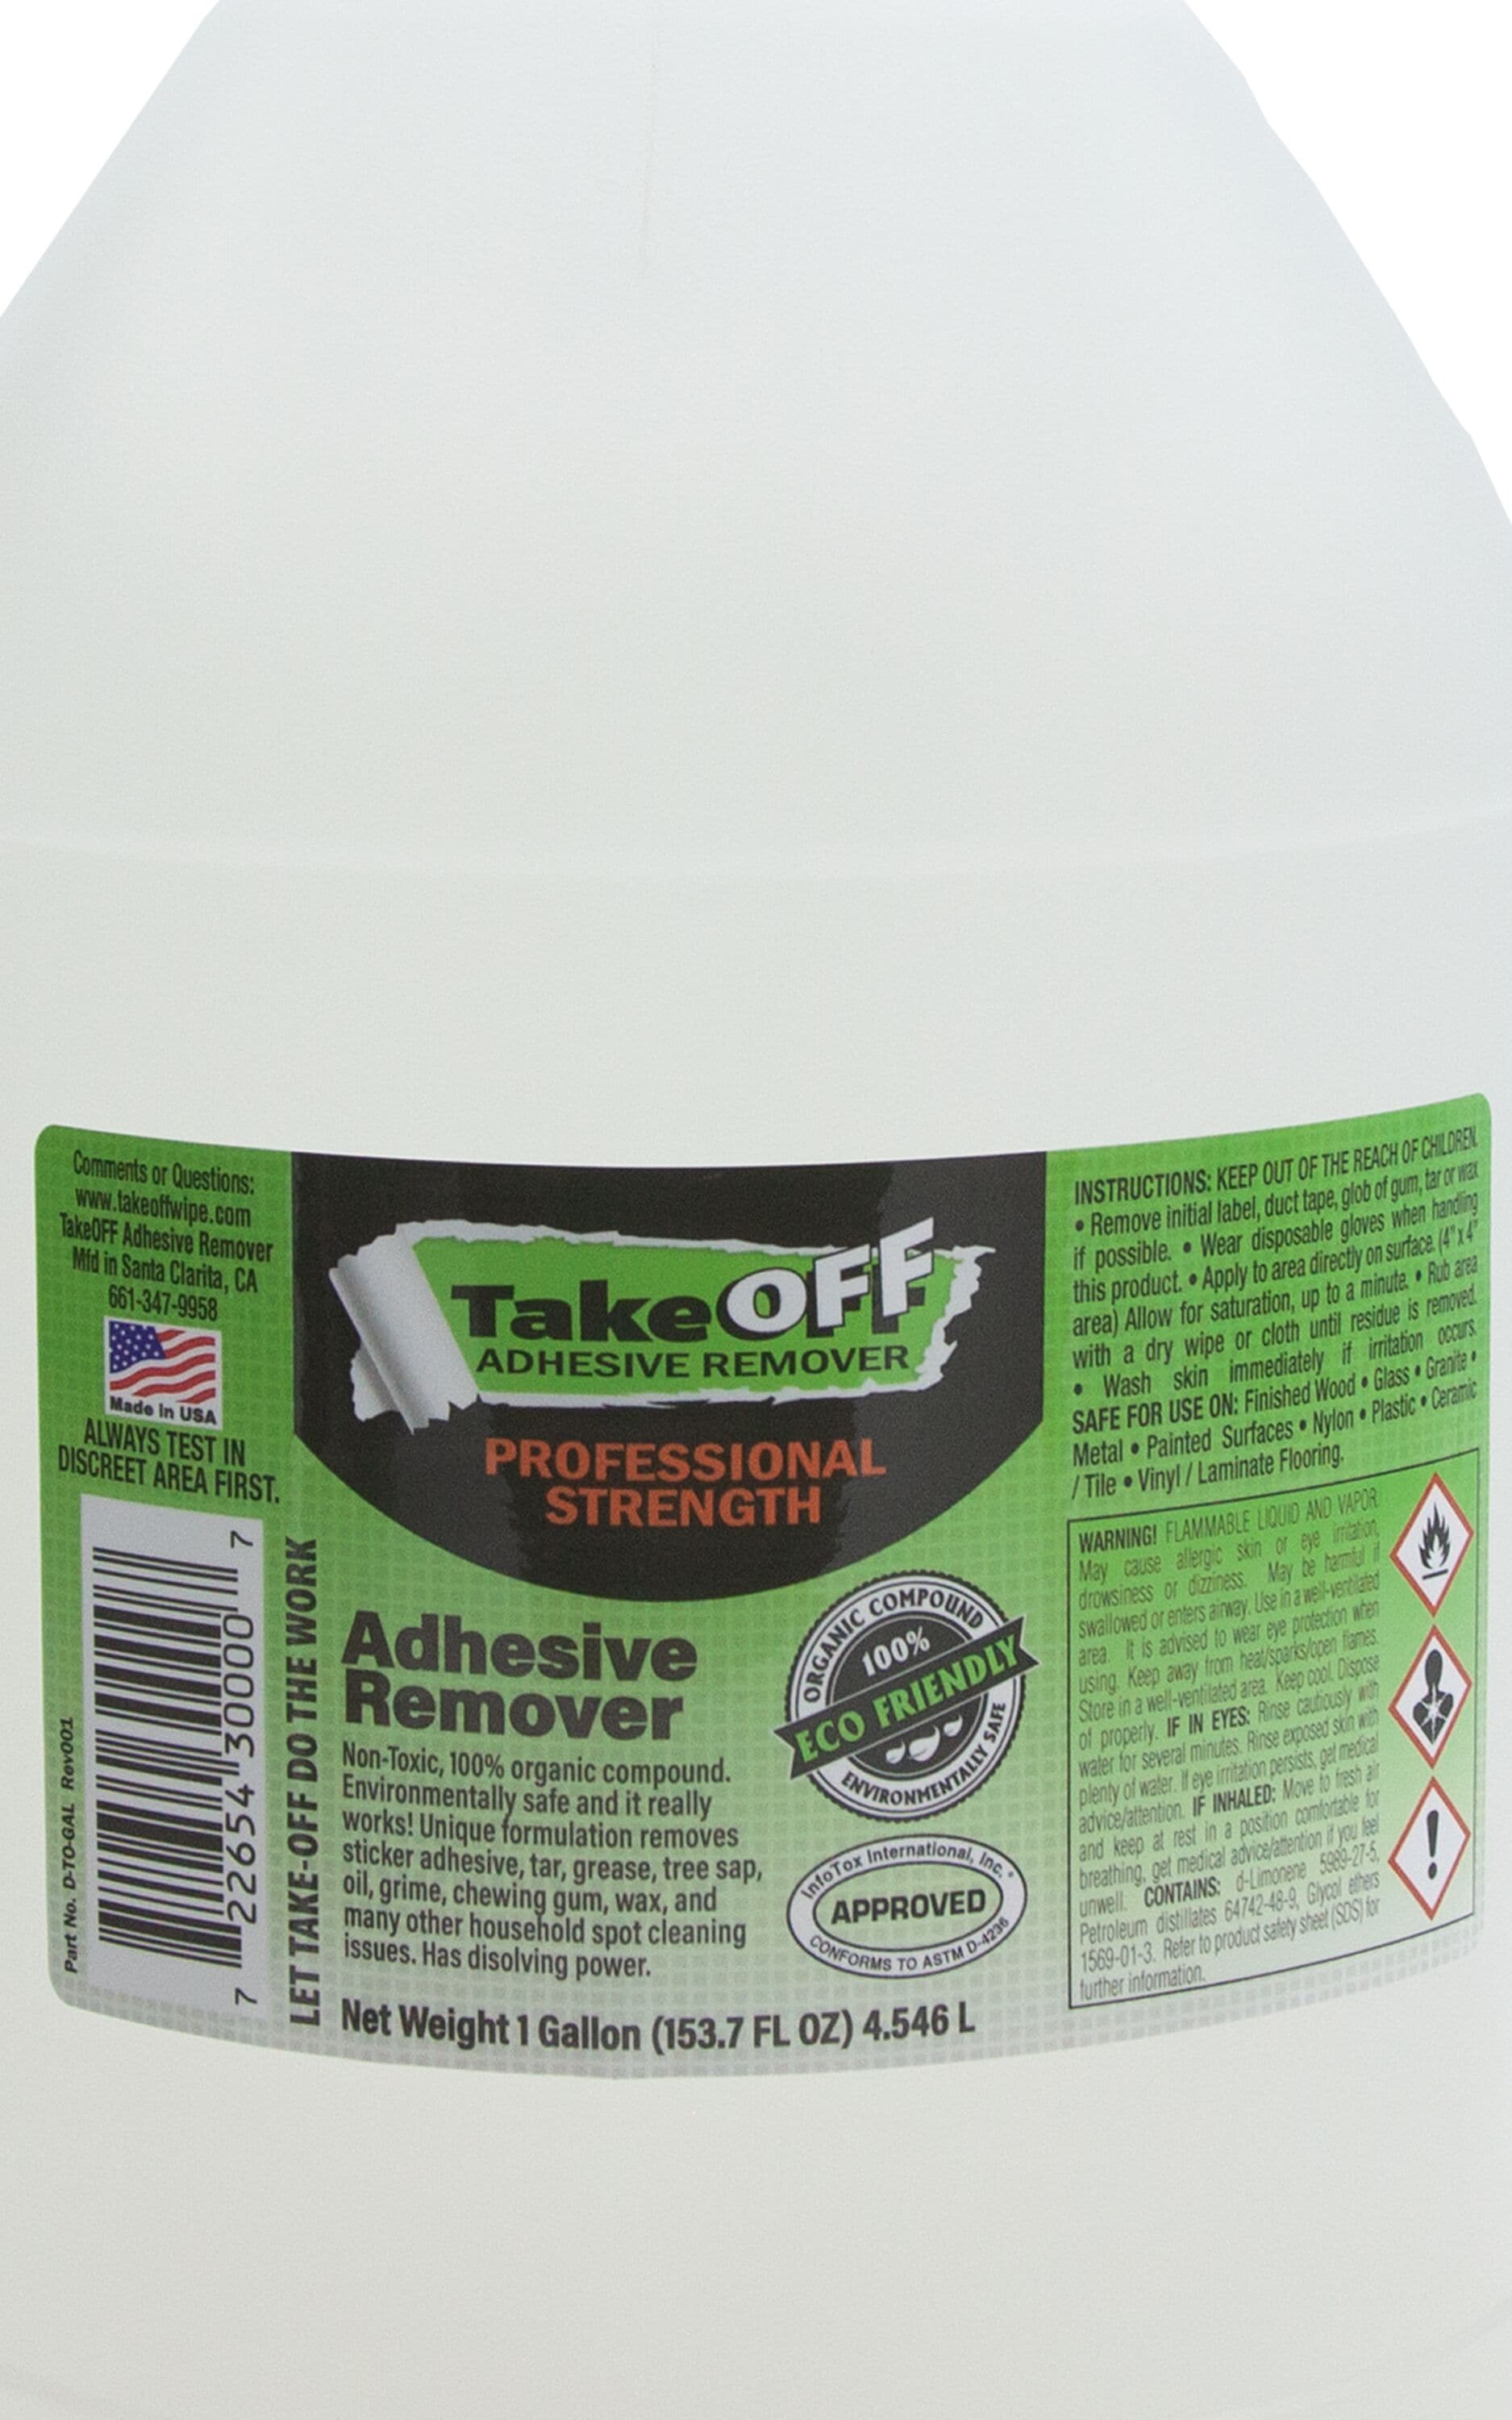 Lift Off Tape, Label, Adhesive Remover 32 oz. Bottle